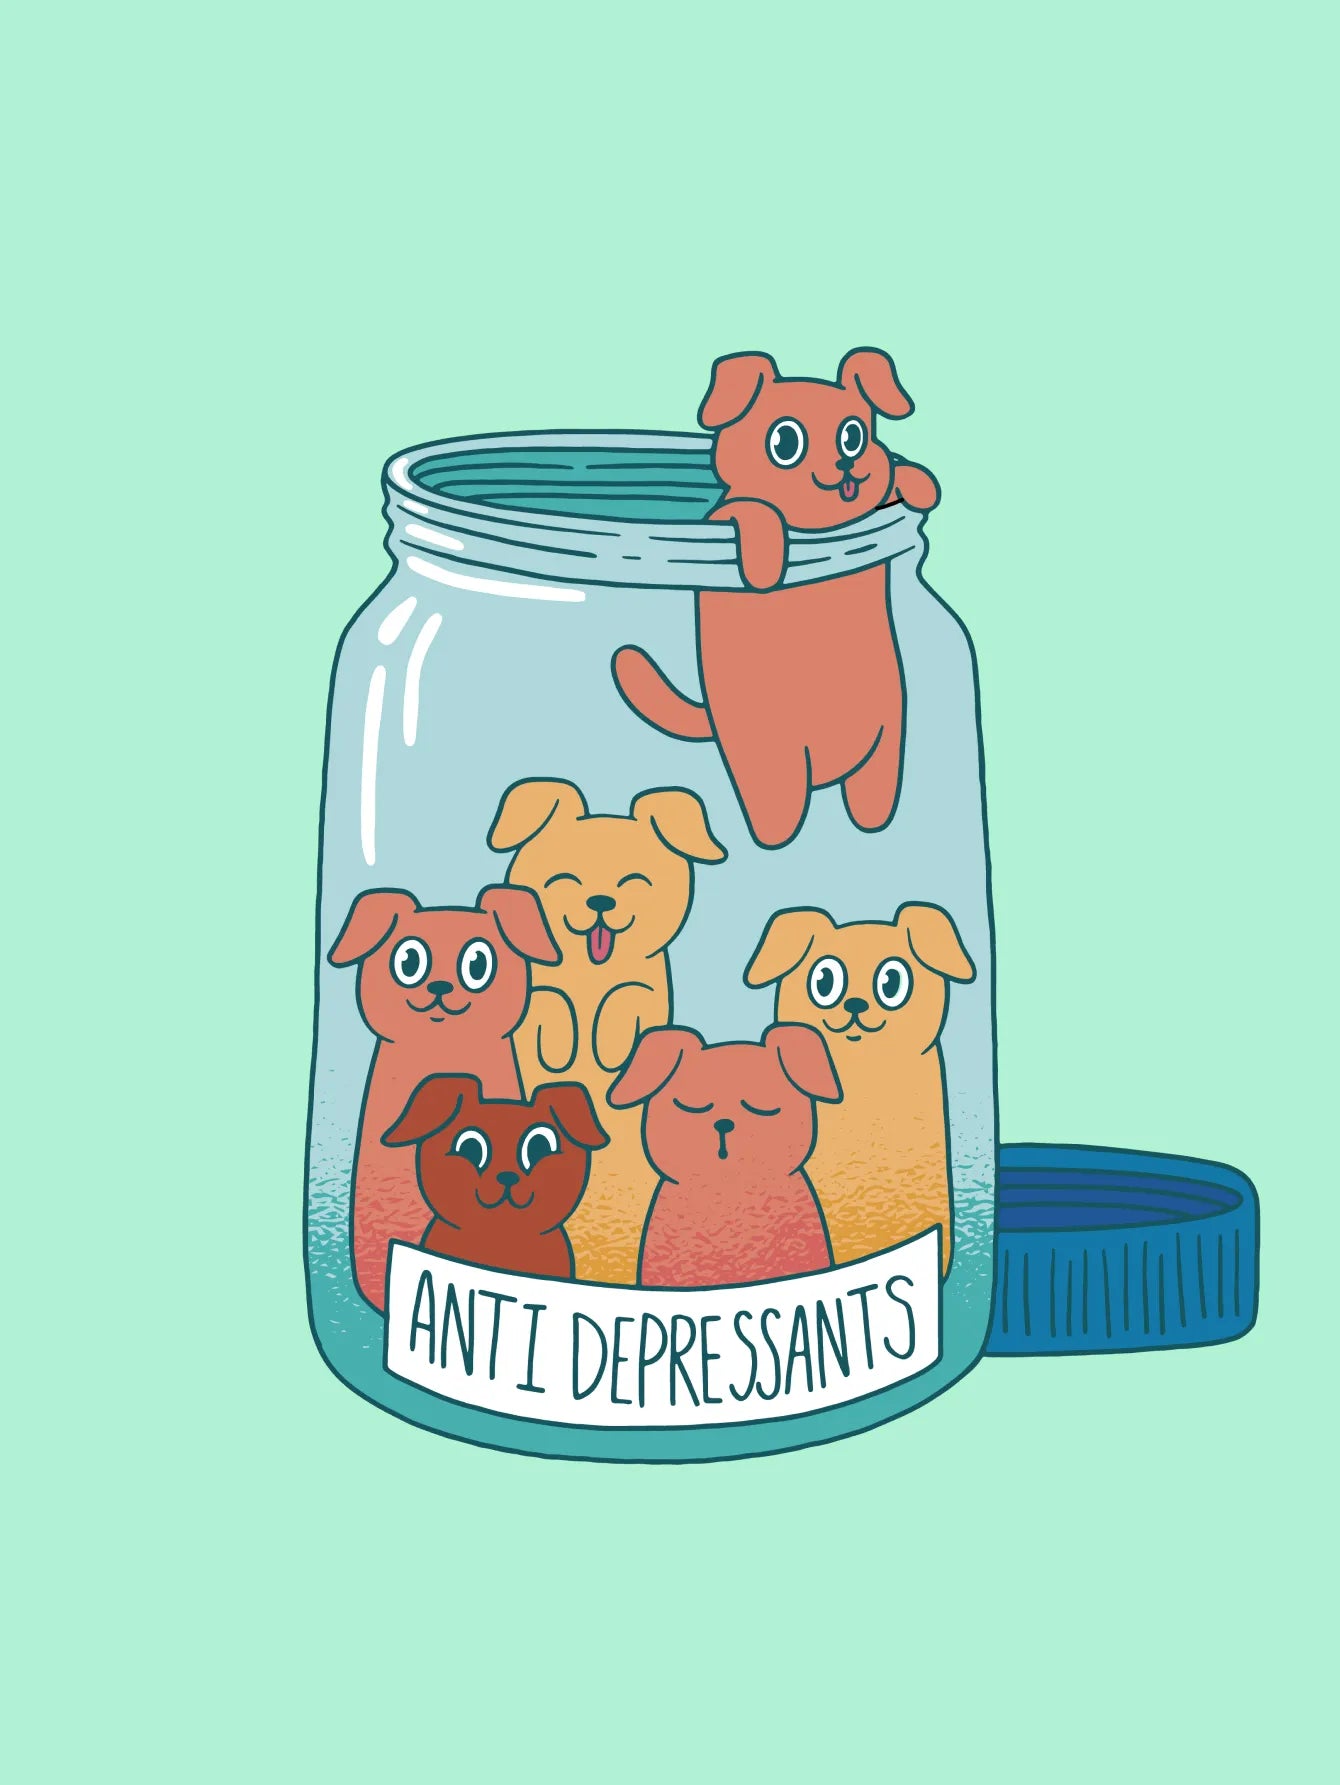 A Jar Full of Dogs and The Quote